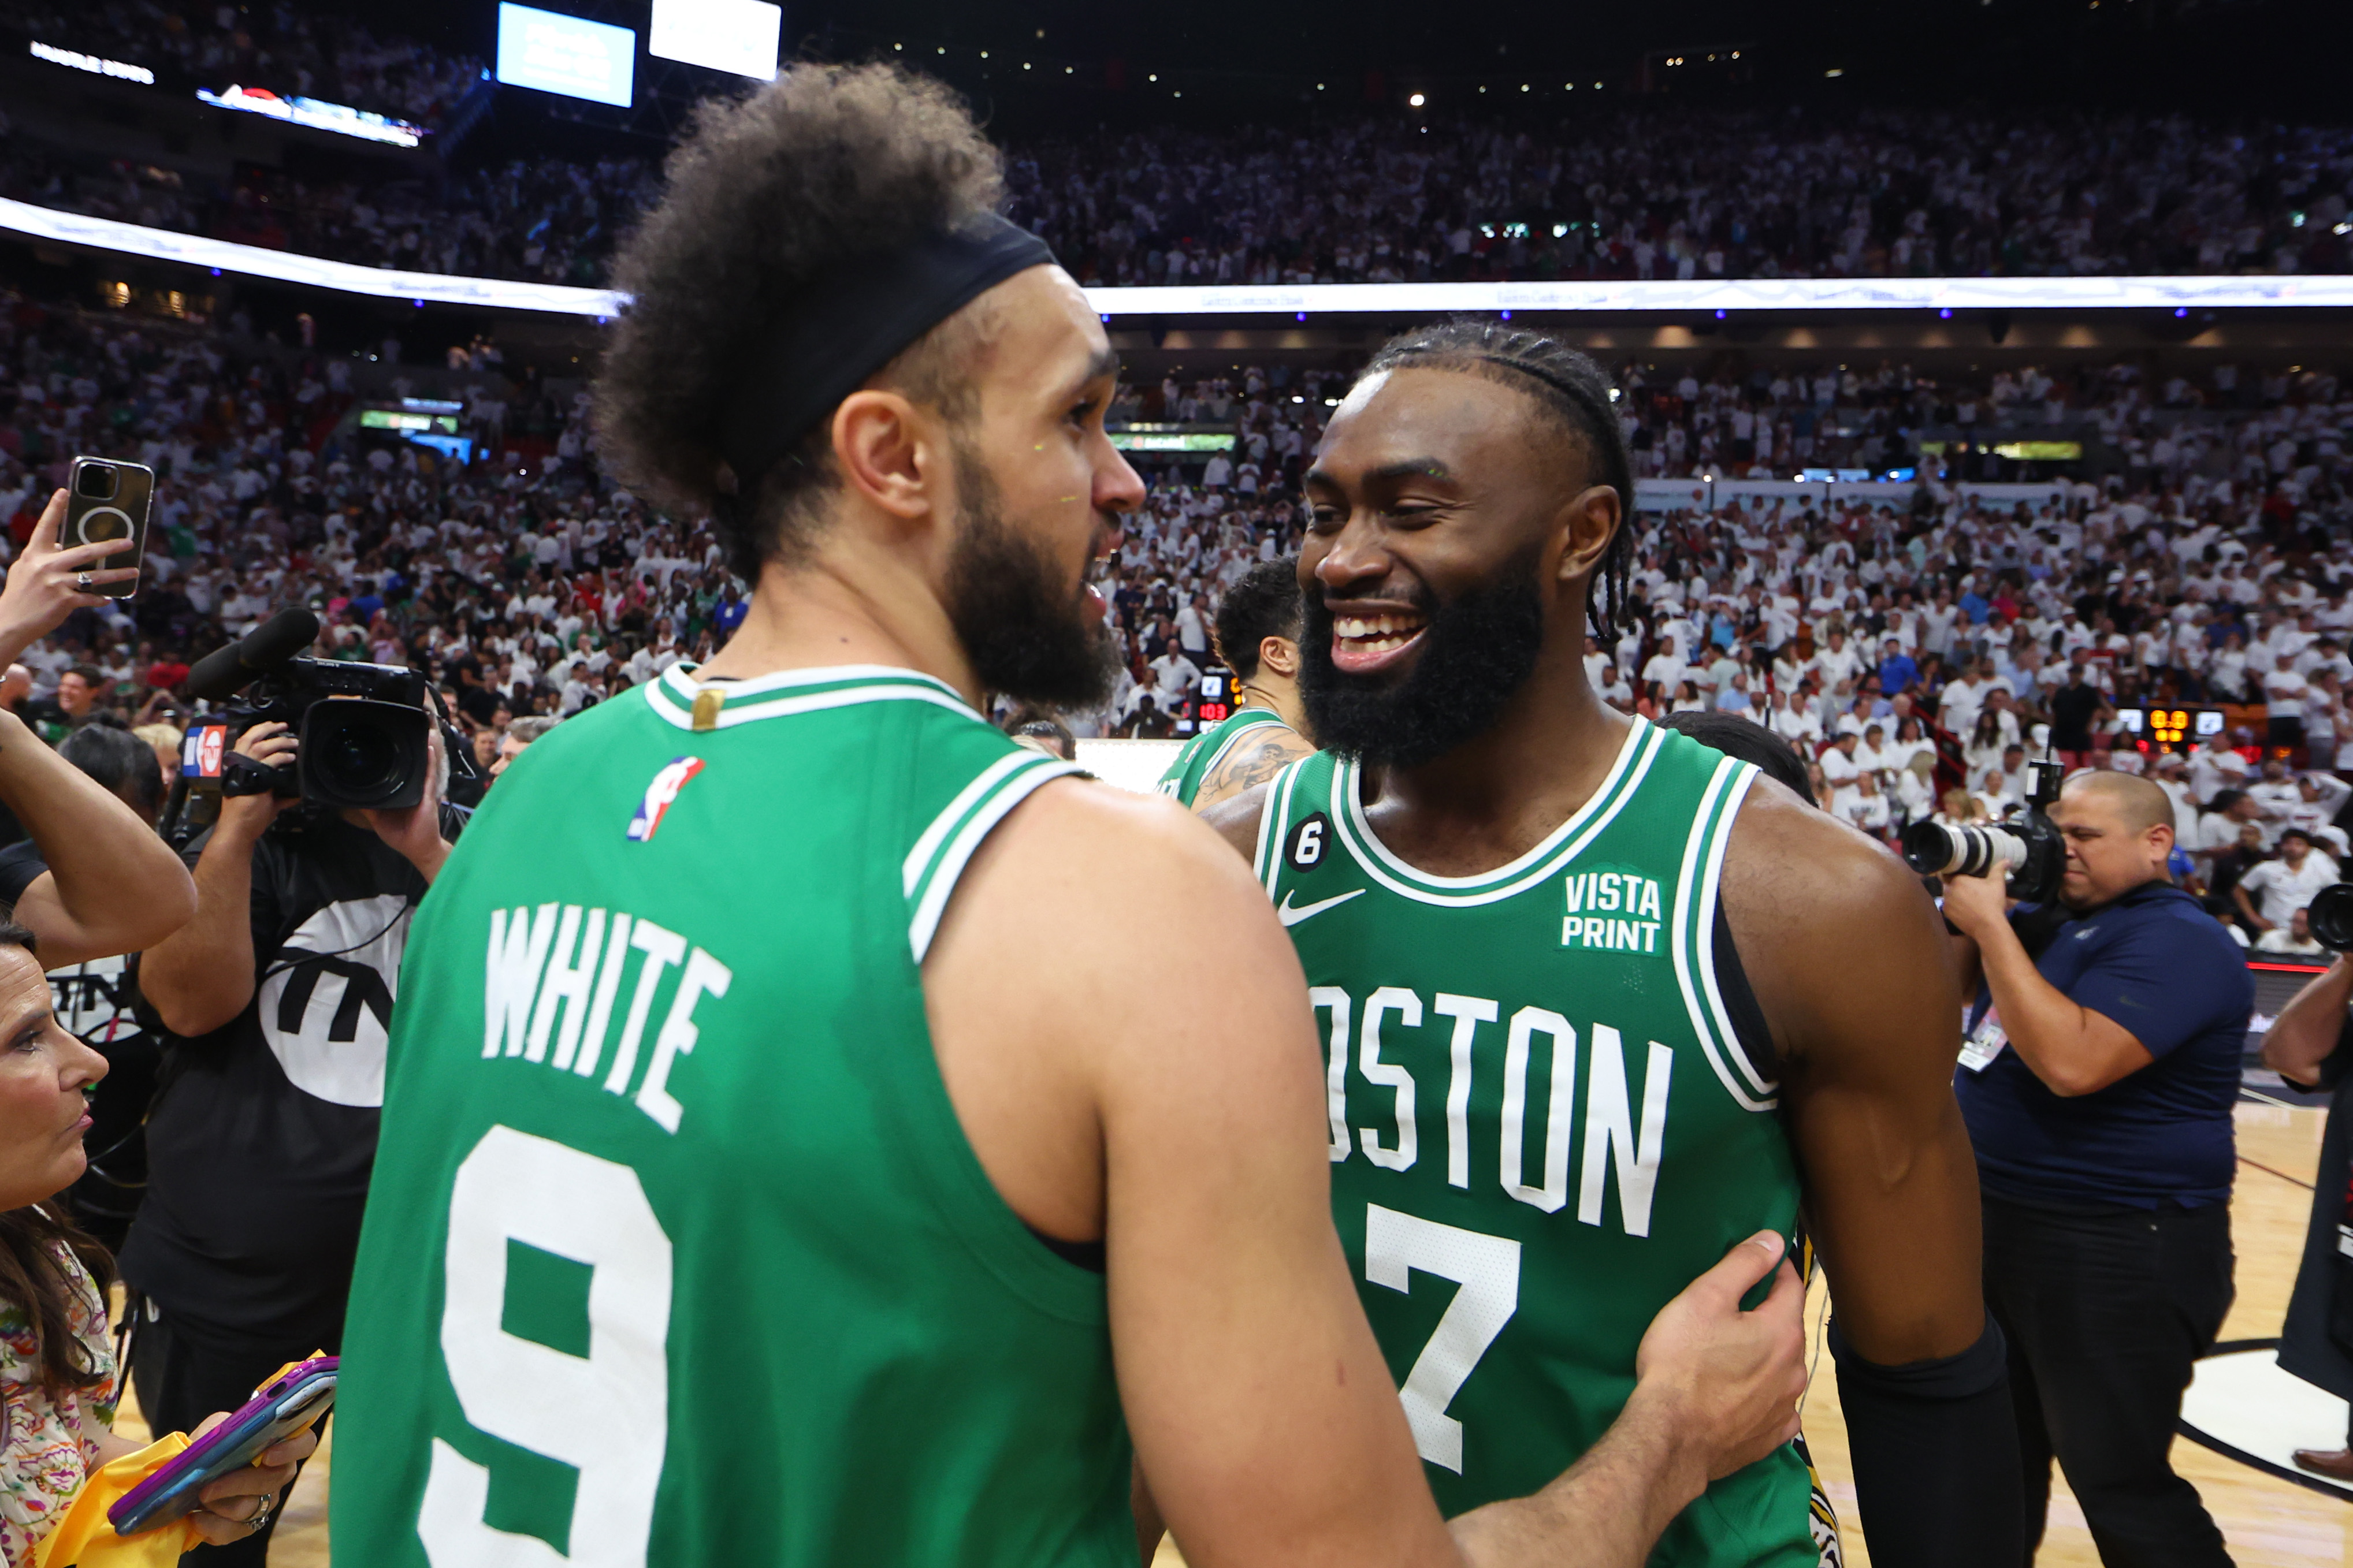 NBA institutes new rules and the Celtics start hot